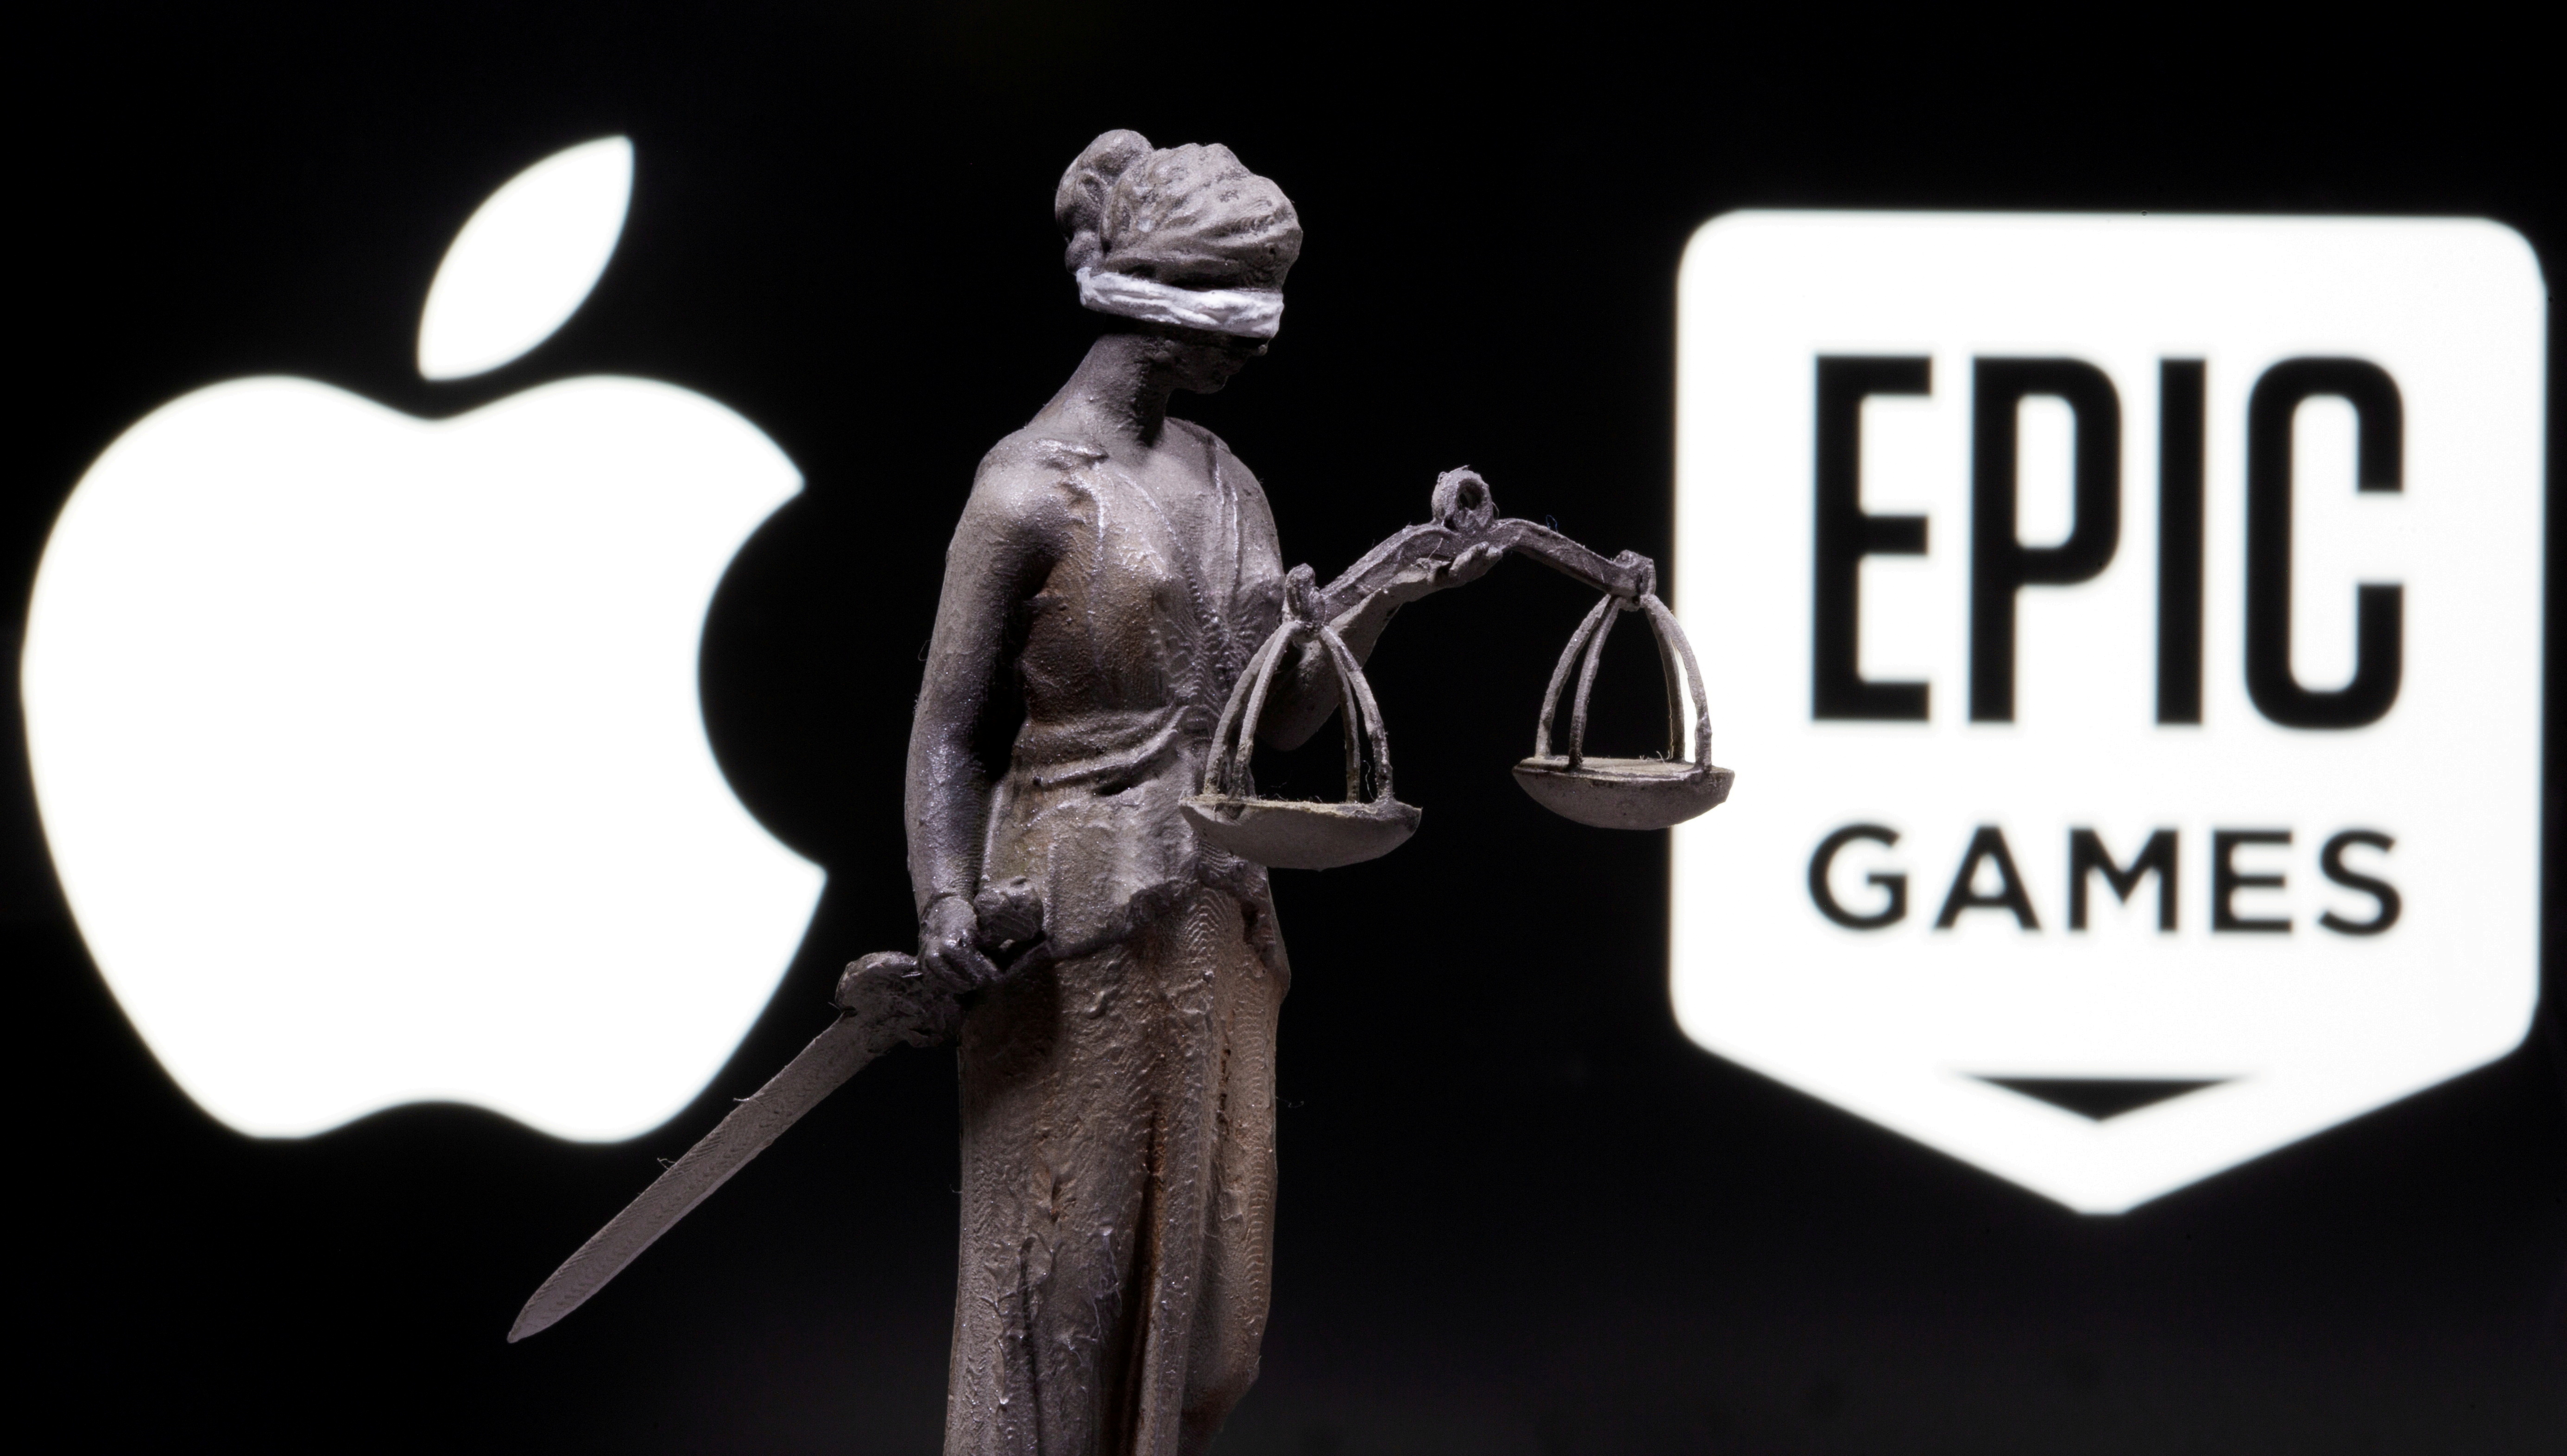 3D printed Lady Justice figure is seen in front of displayed Apple and Epic Games logos in this illustration photo taken February 17, 2021. REUTERS/Dado Ruvic/Illustration/File Photo